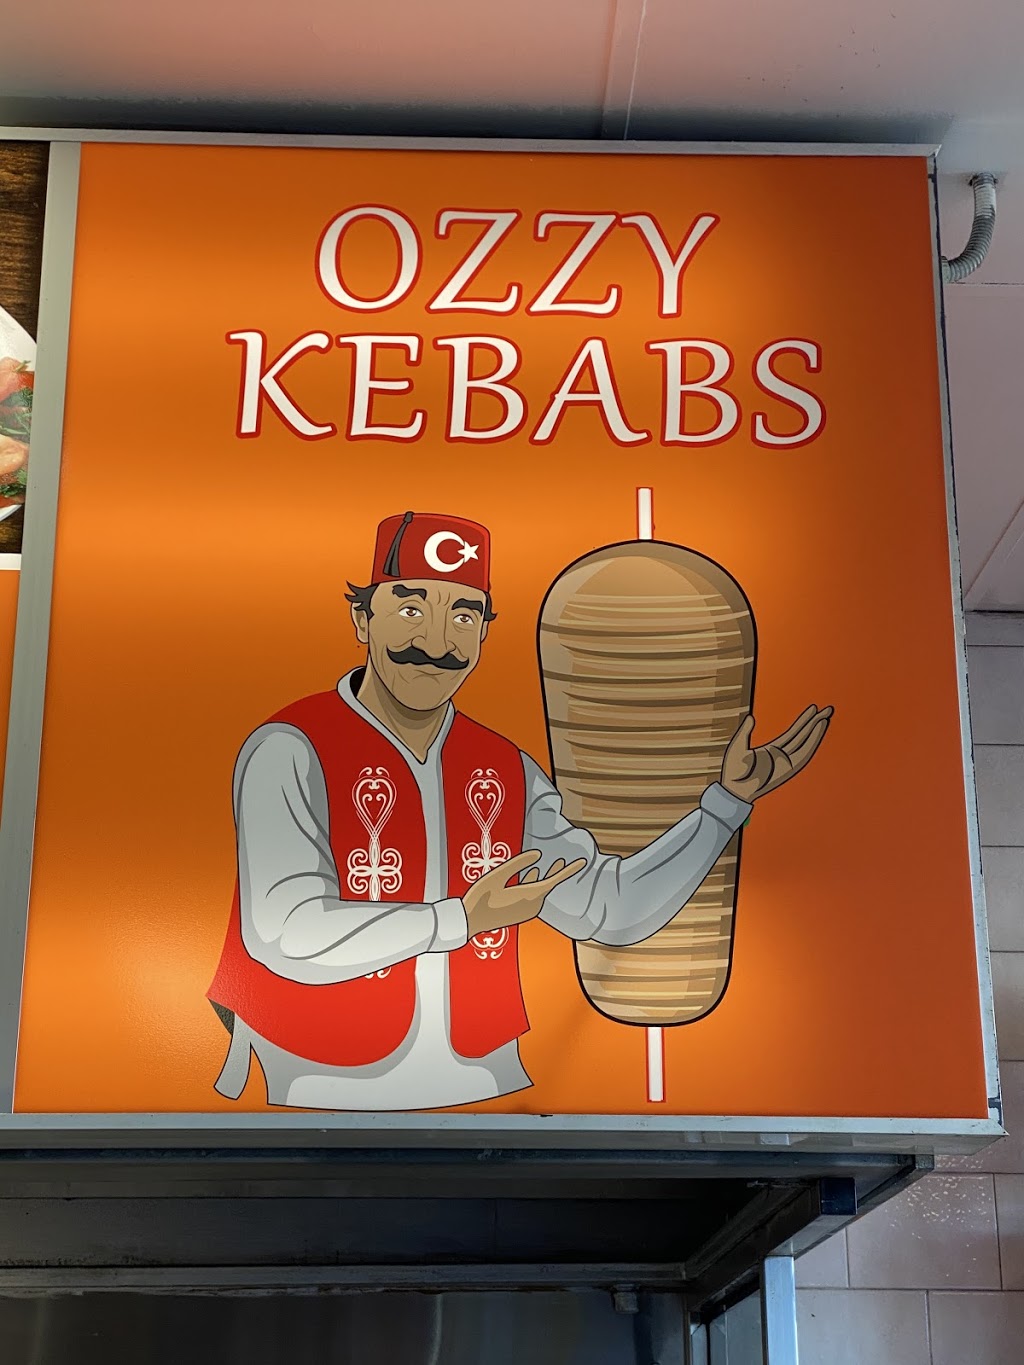 Ozzy Kebabs | meal takeaway | 21-27 Bells Line of Rd, North Richmond NSW 2754, Australia | 0245711769 OR +61 2 4571 1769